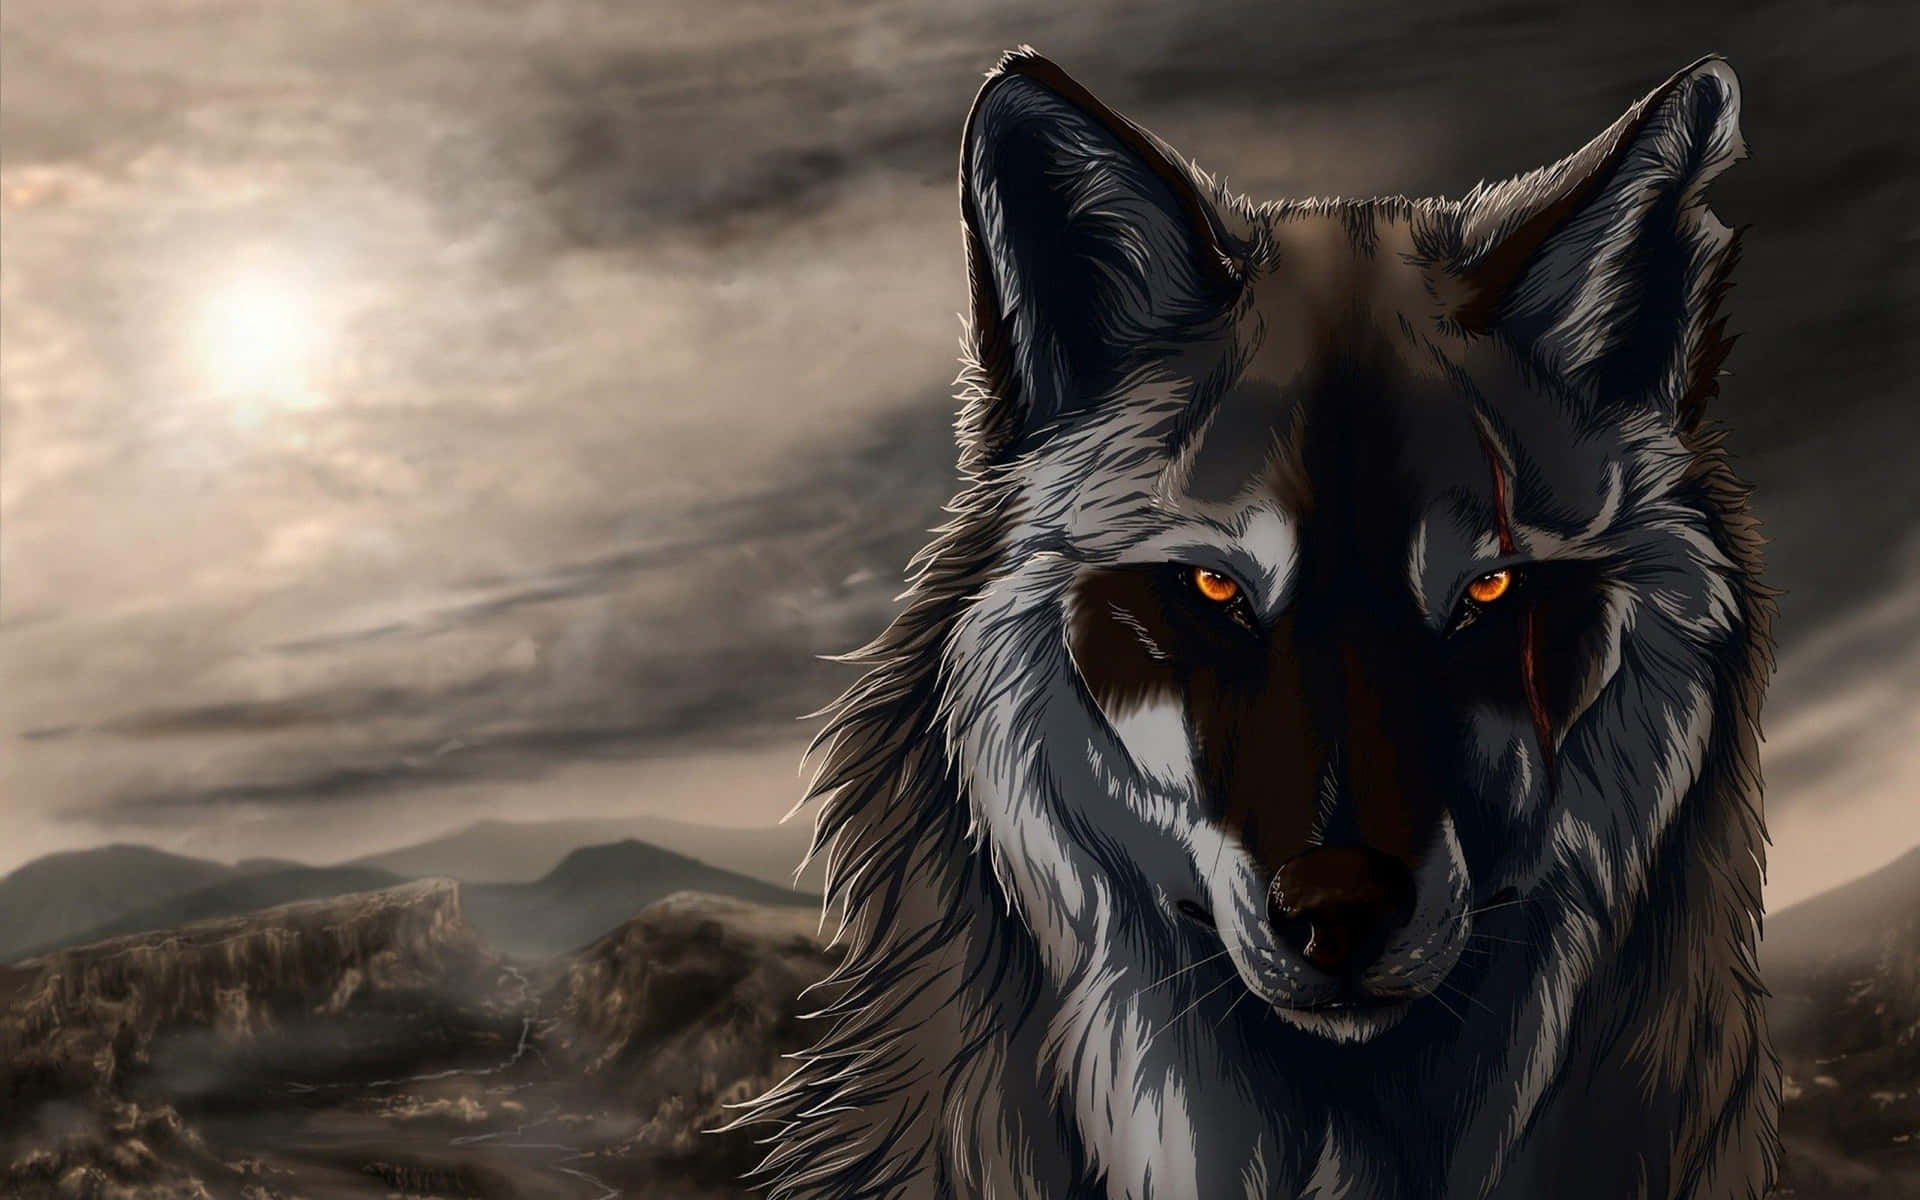 A Cool Anime Wolf Standing Majestically Against A Dark Moonlit Sky Wallpaper